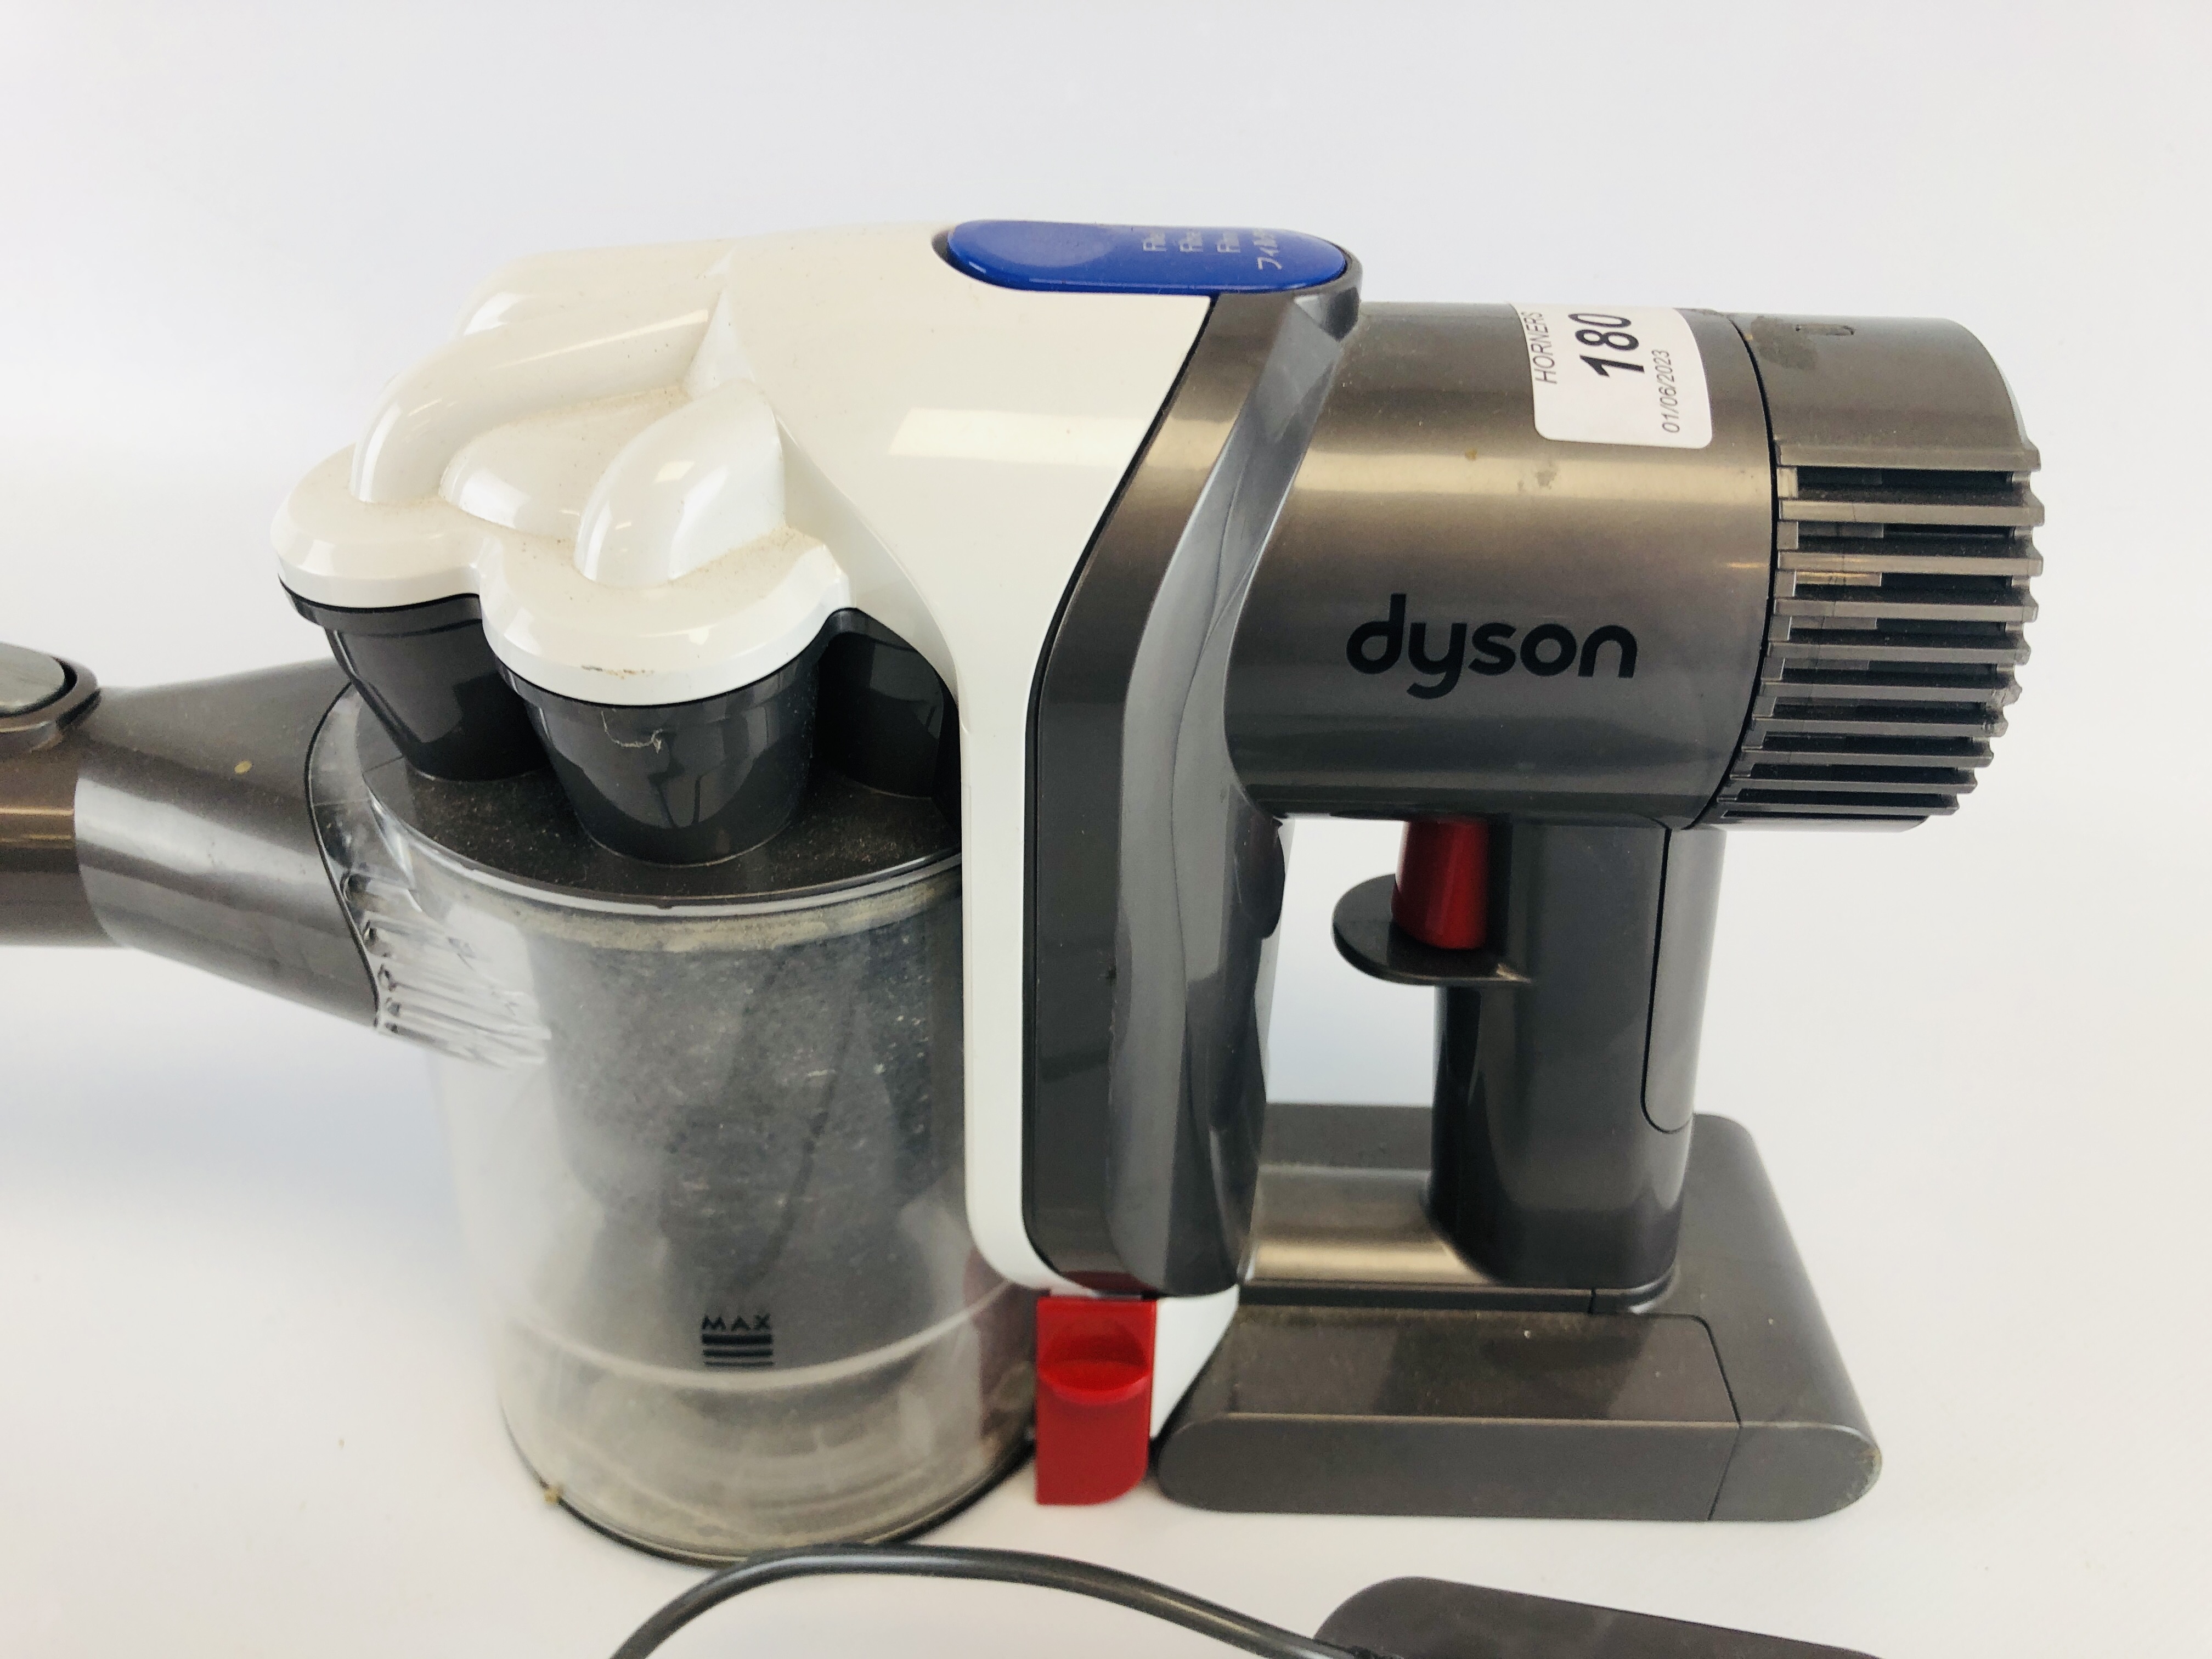 A CORDLESS DYSON DC30 HAND HELD VACUUM CLEANER COMPLETE WITH CHARGER - SOLD AS SEEN. - Image 2 of 3